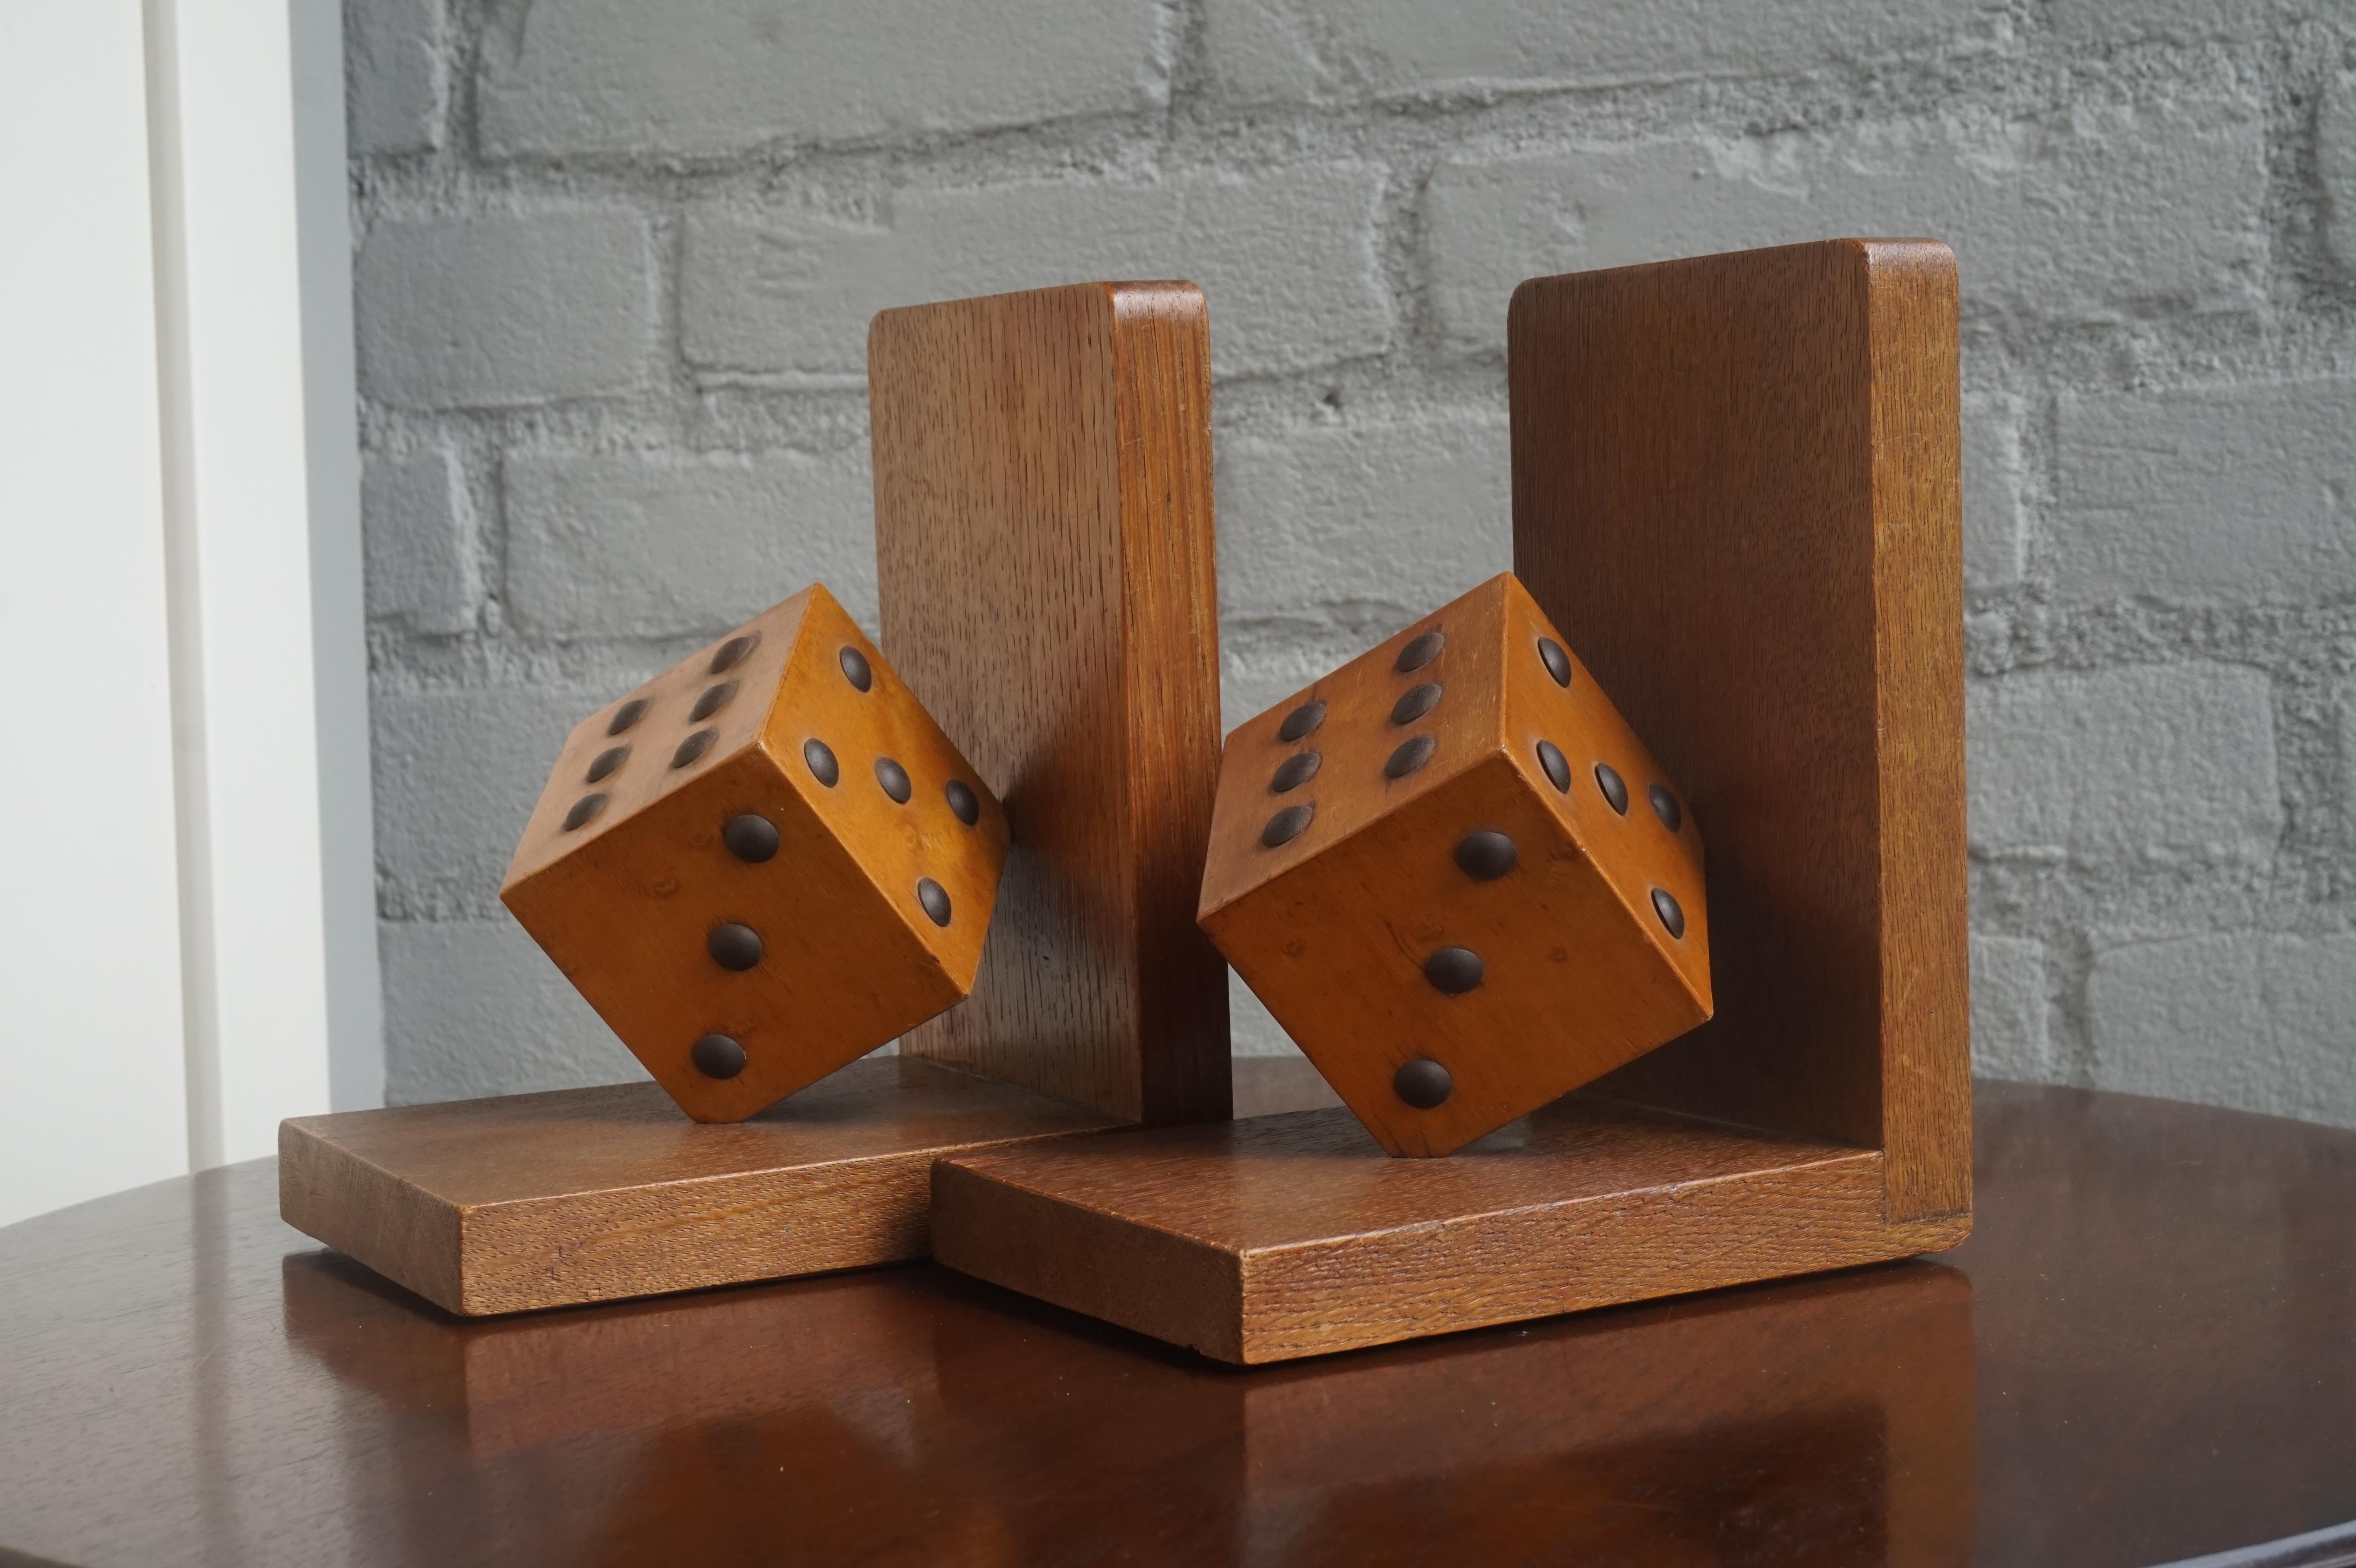 Hand-Crafted Arts & Crafts Pair of Wooden Dice with Metal Nails Bookends for The Gamblers